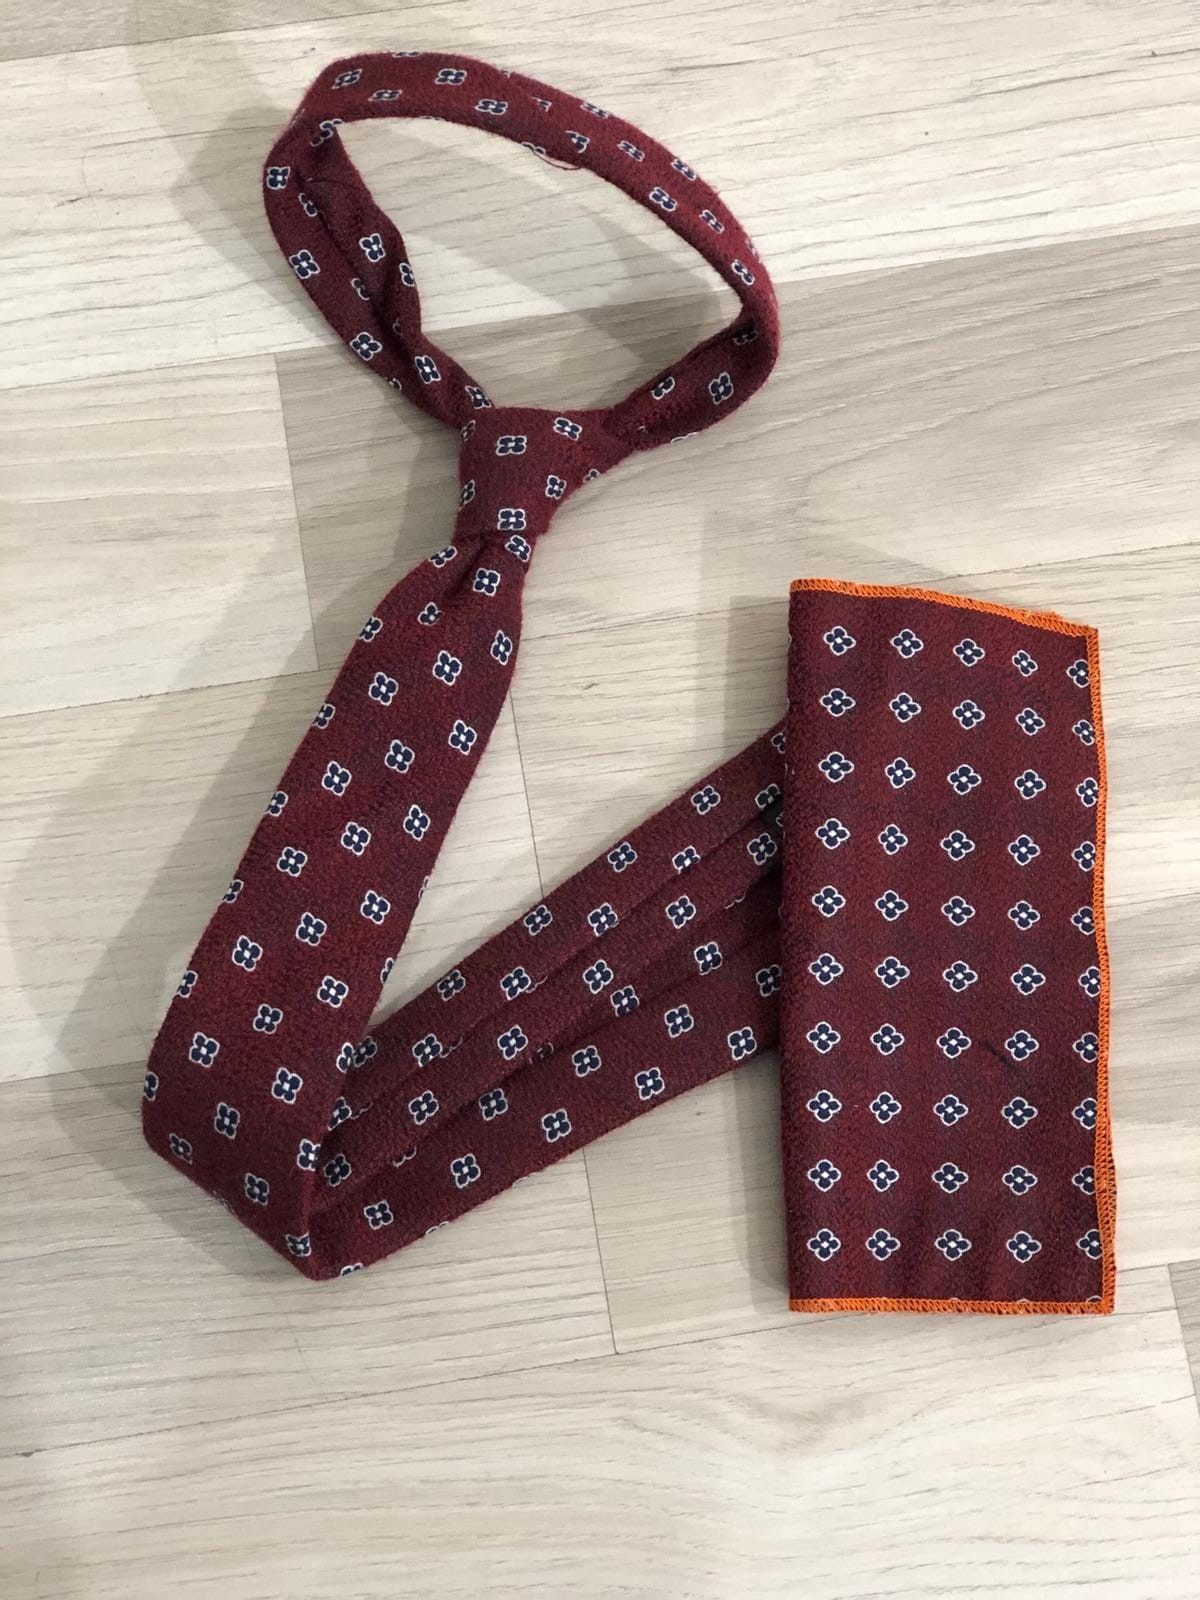 Buy Claret Red Floral Skinny Tie by GentWith.com with Free Shipping